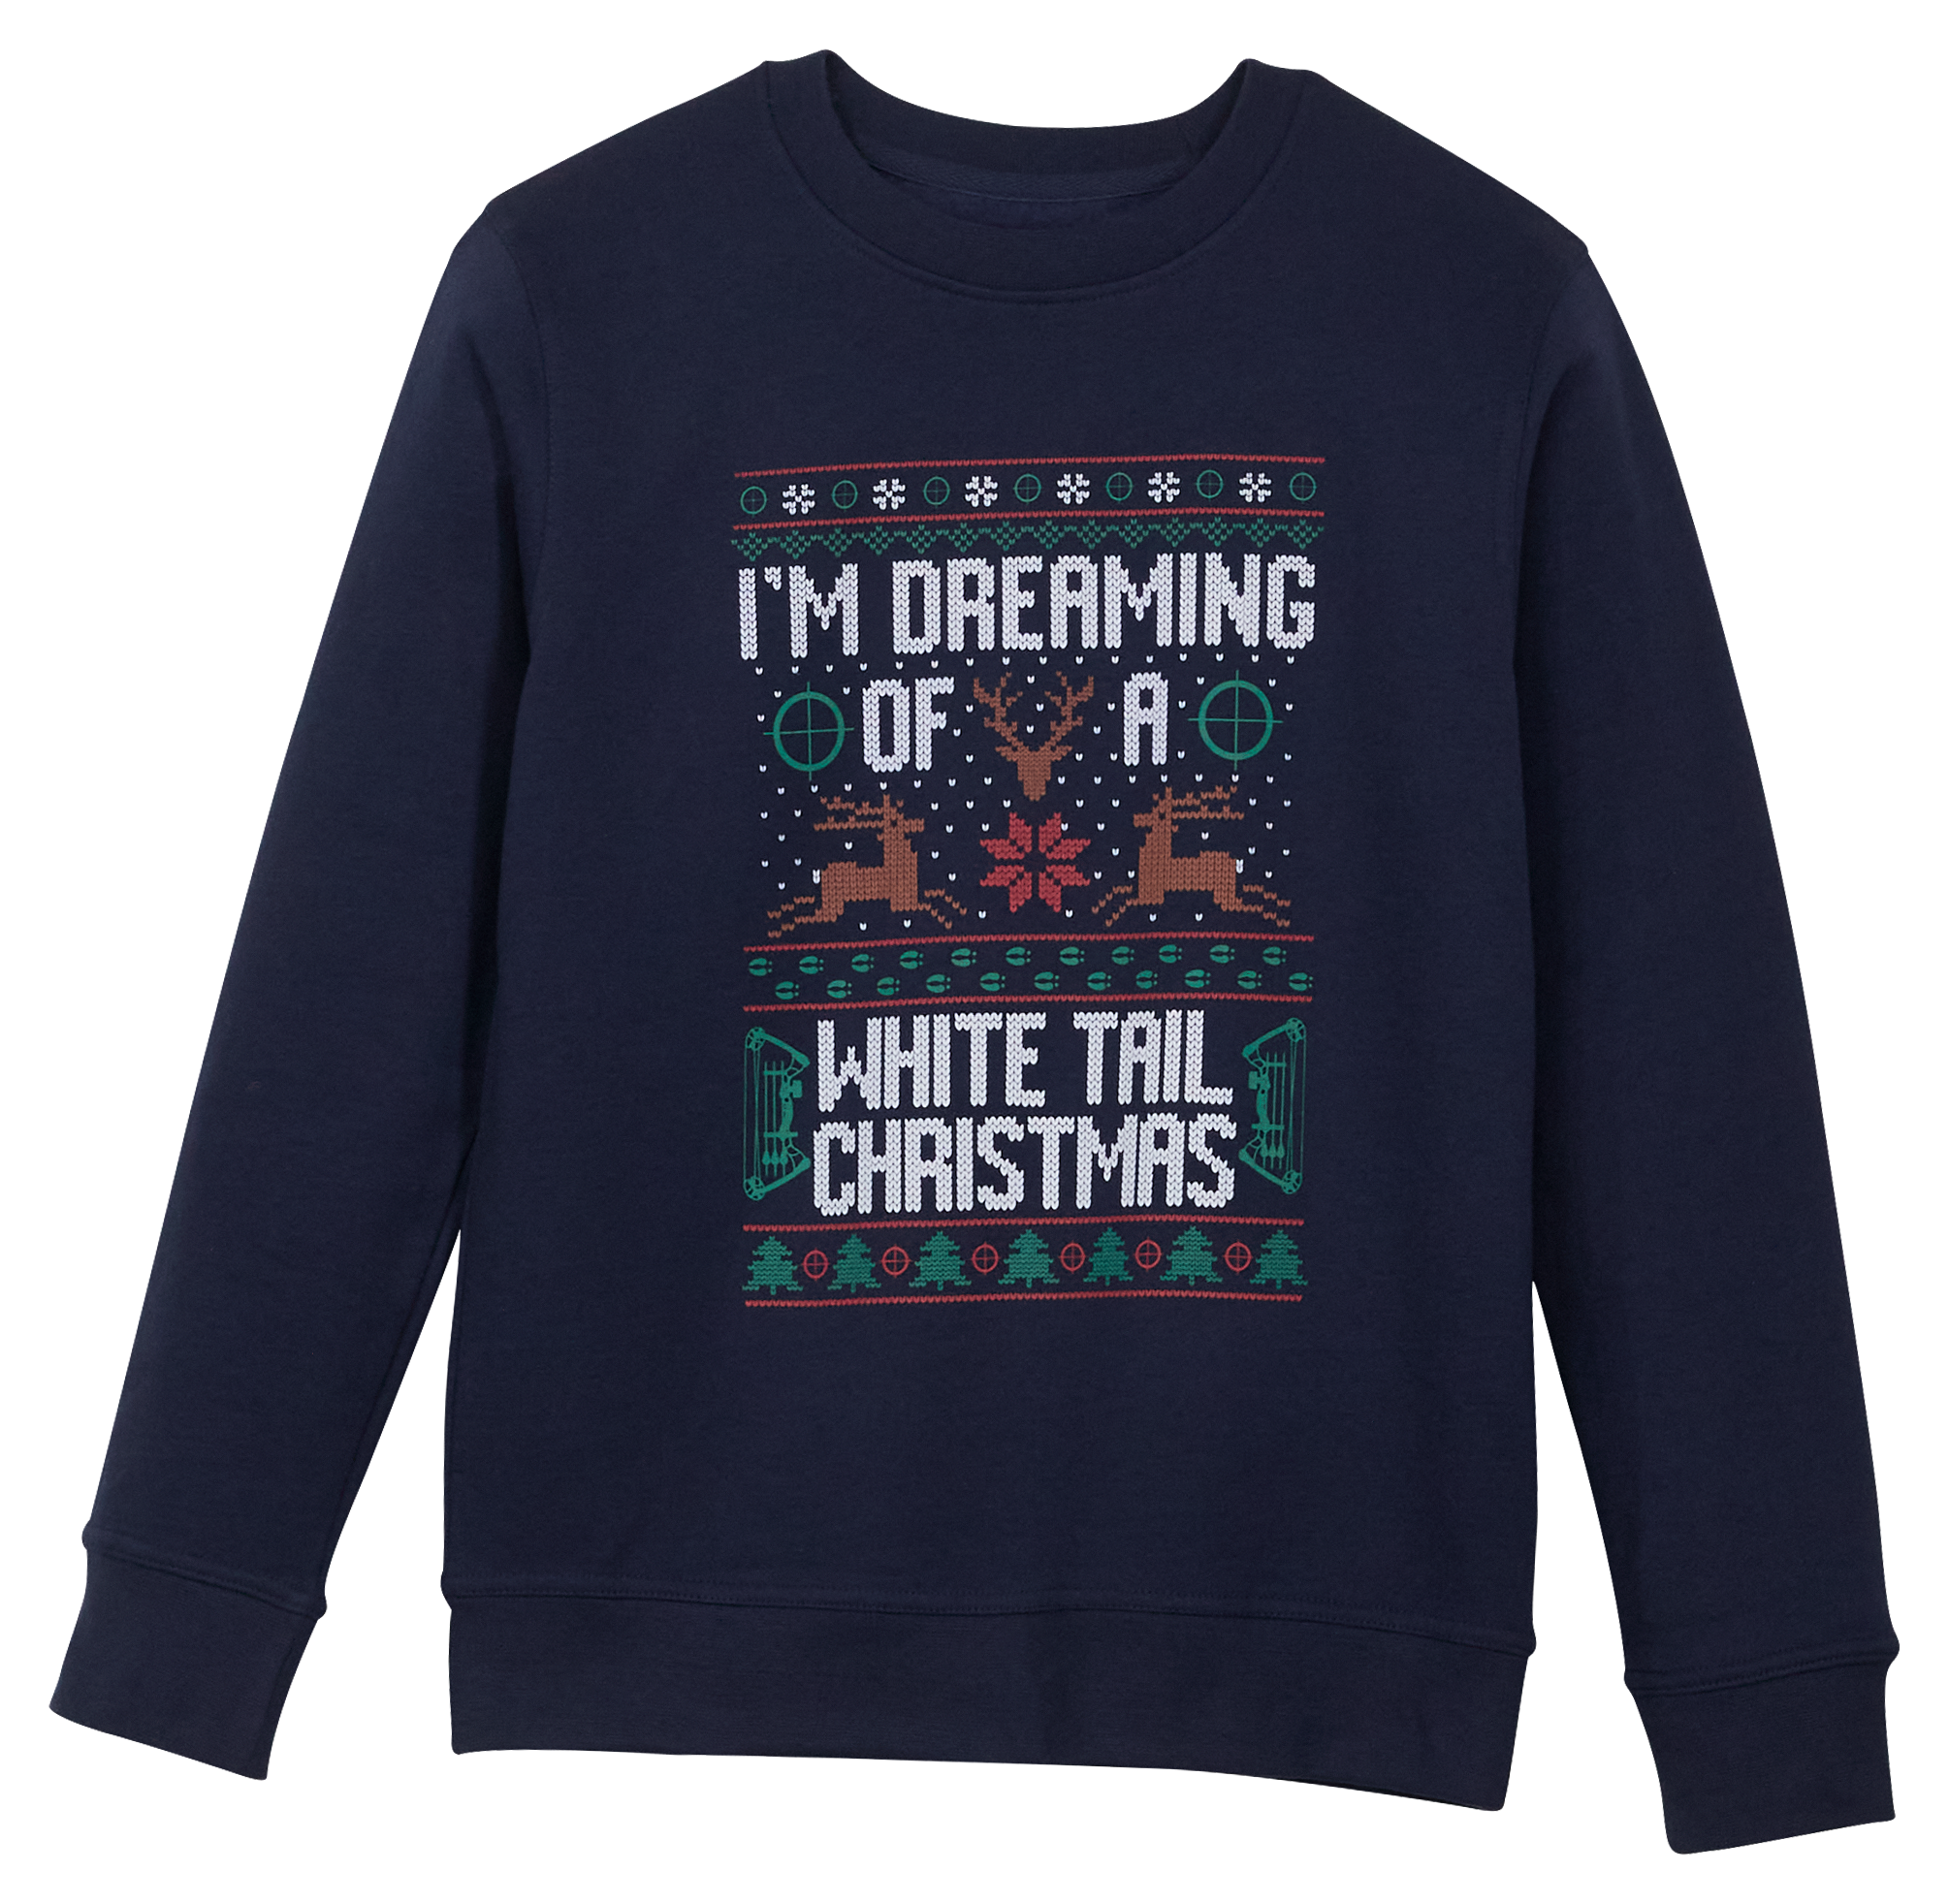 Bass Pro Shops Whitetail Christmas Sweatshirt for Toddlers or Kids